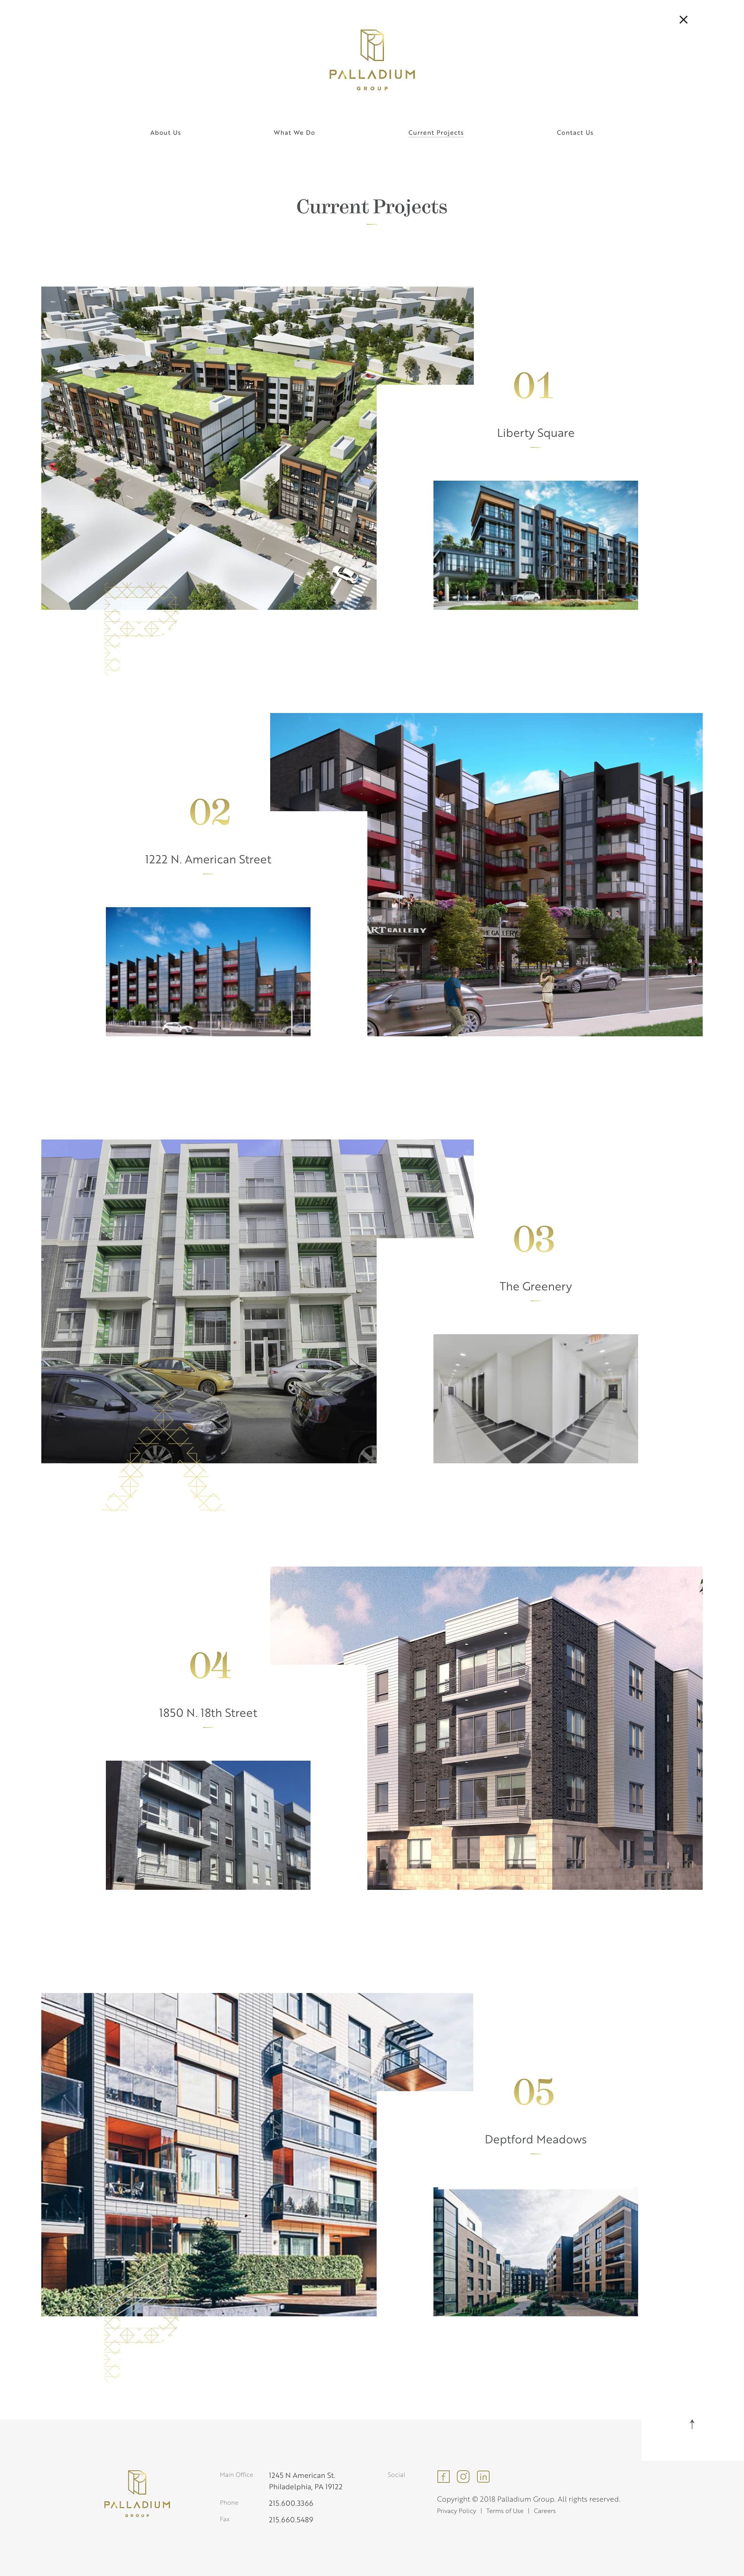 Palladium Group's Inner Pages Design and Development